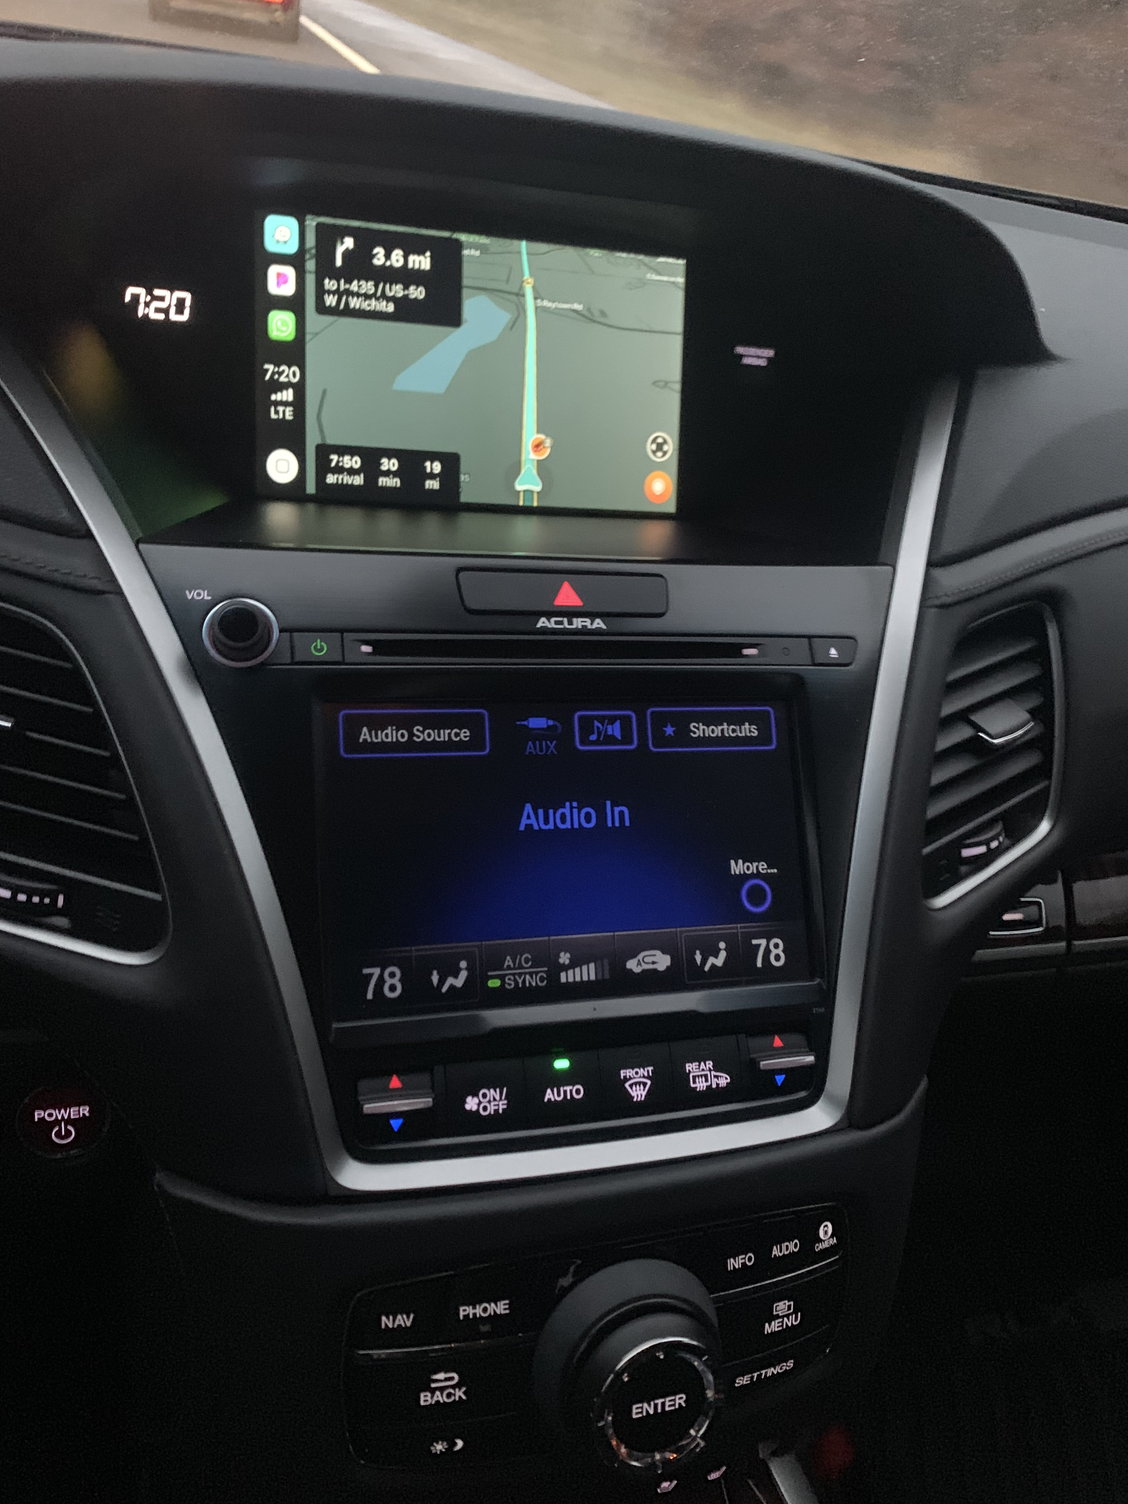 Add Apple CarPlay or Android Auto to your car with this HUD on